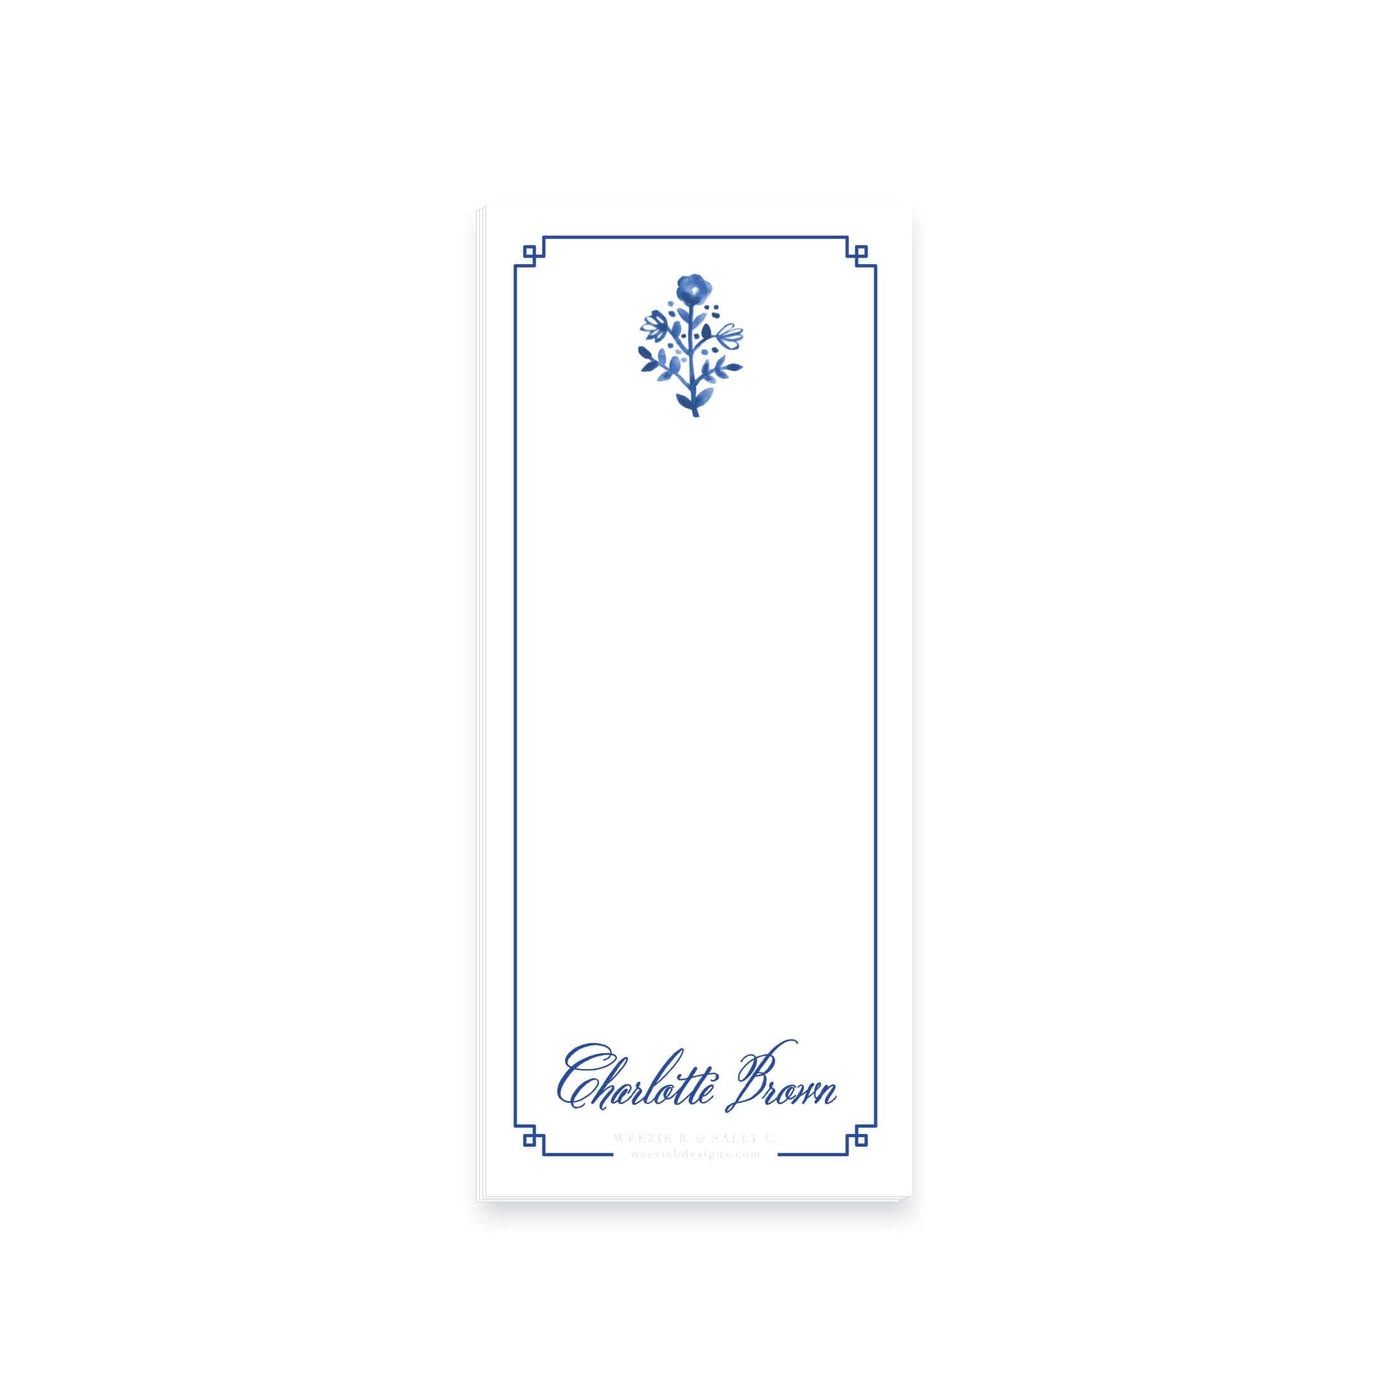 Delft Flowers Notepad